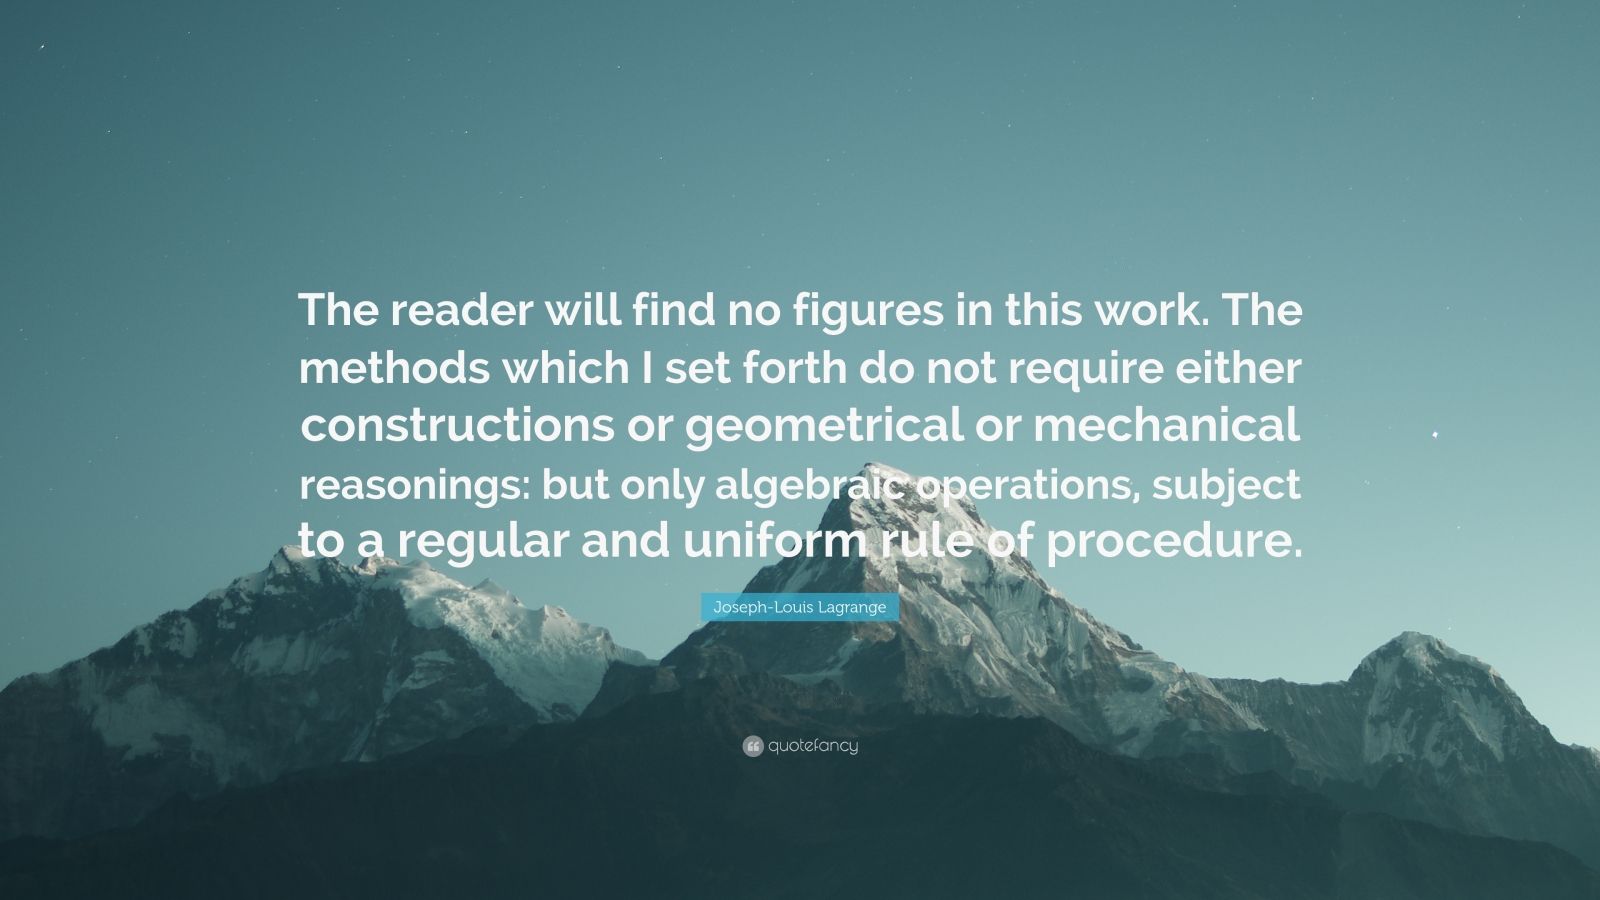 Joseph-Louis Lagrange Quote: “The reader will find no figures in this work. The methods which I ...